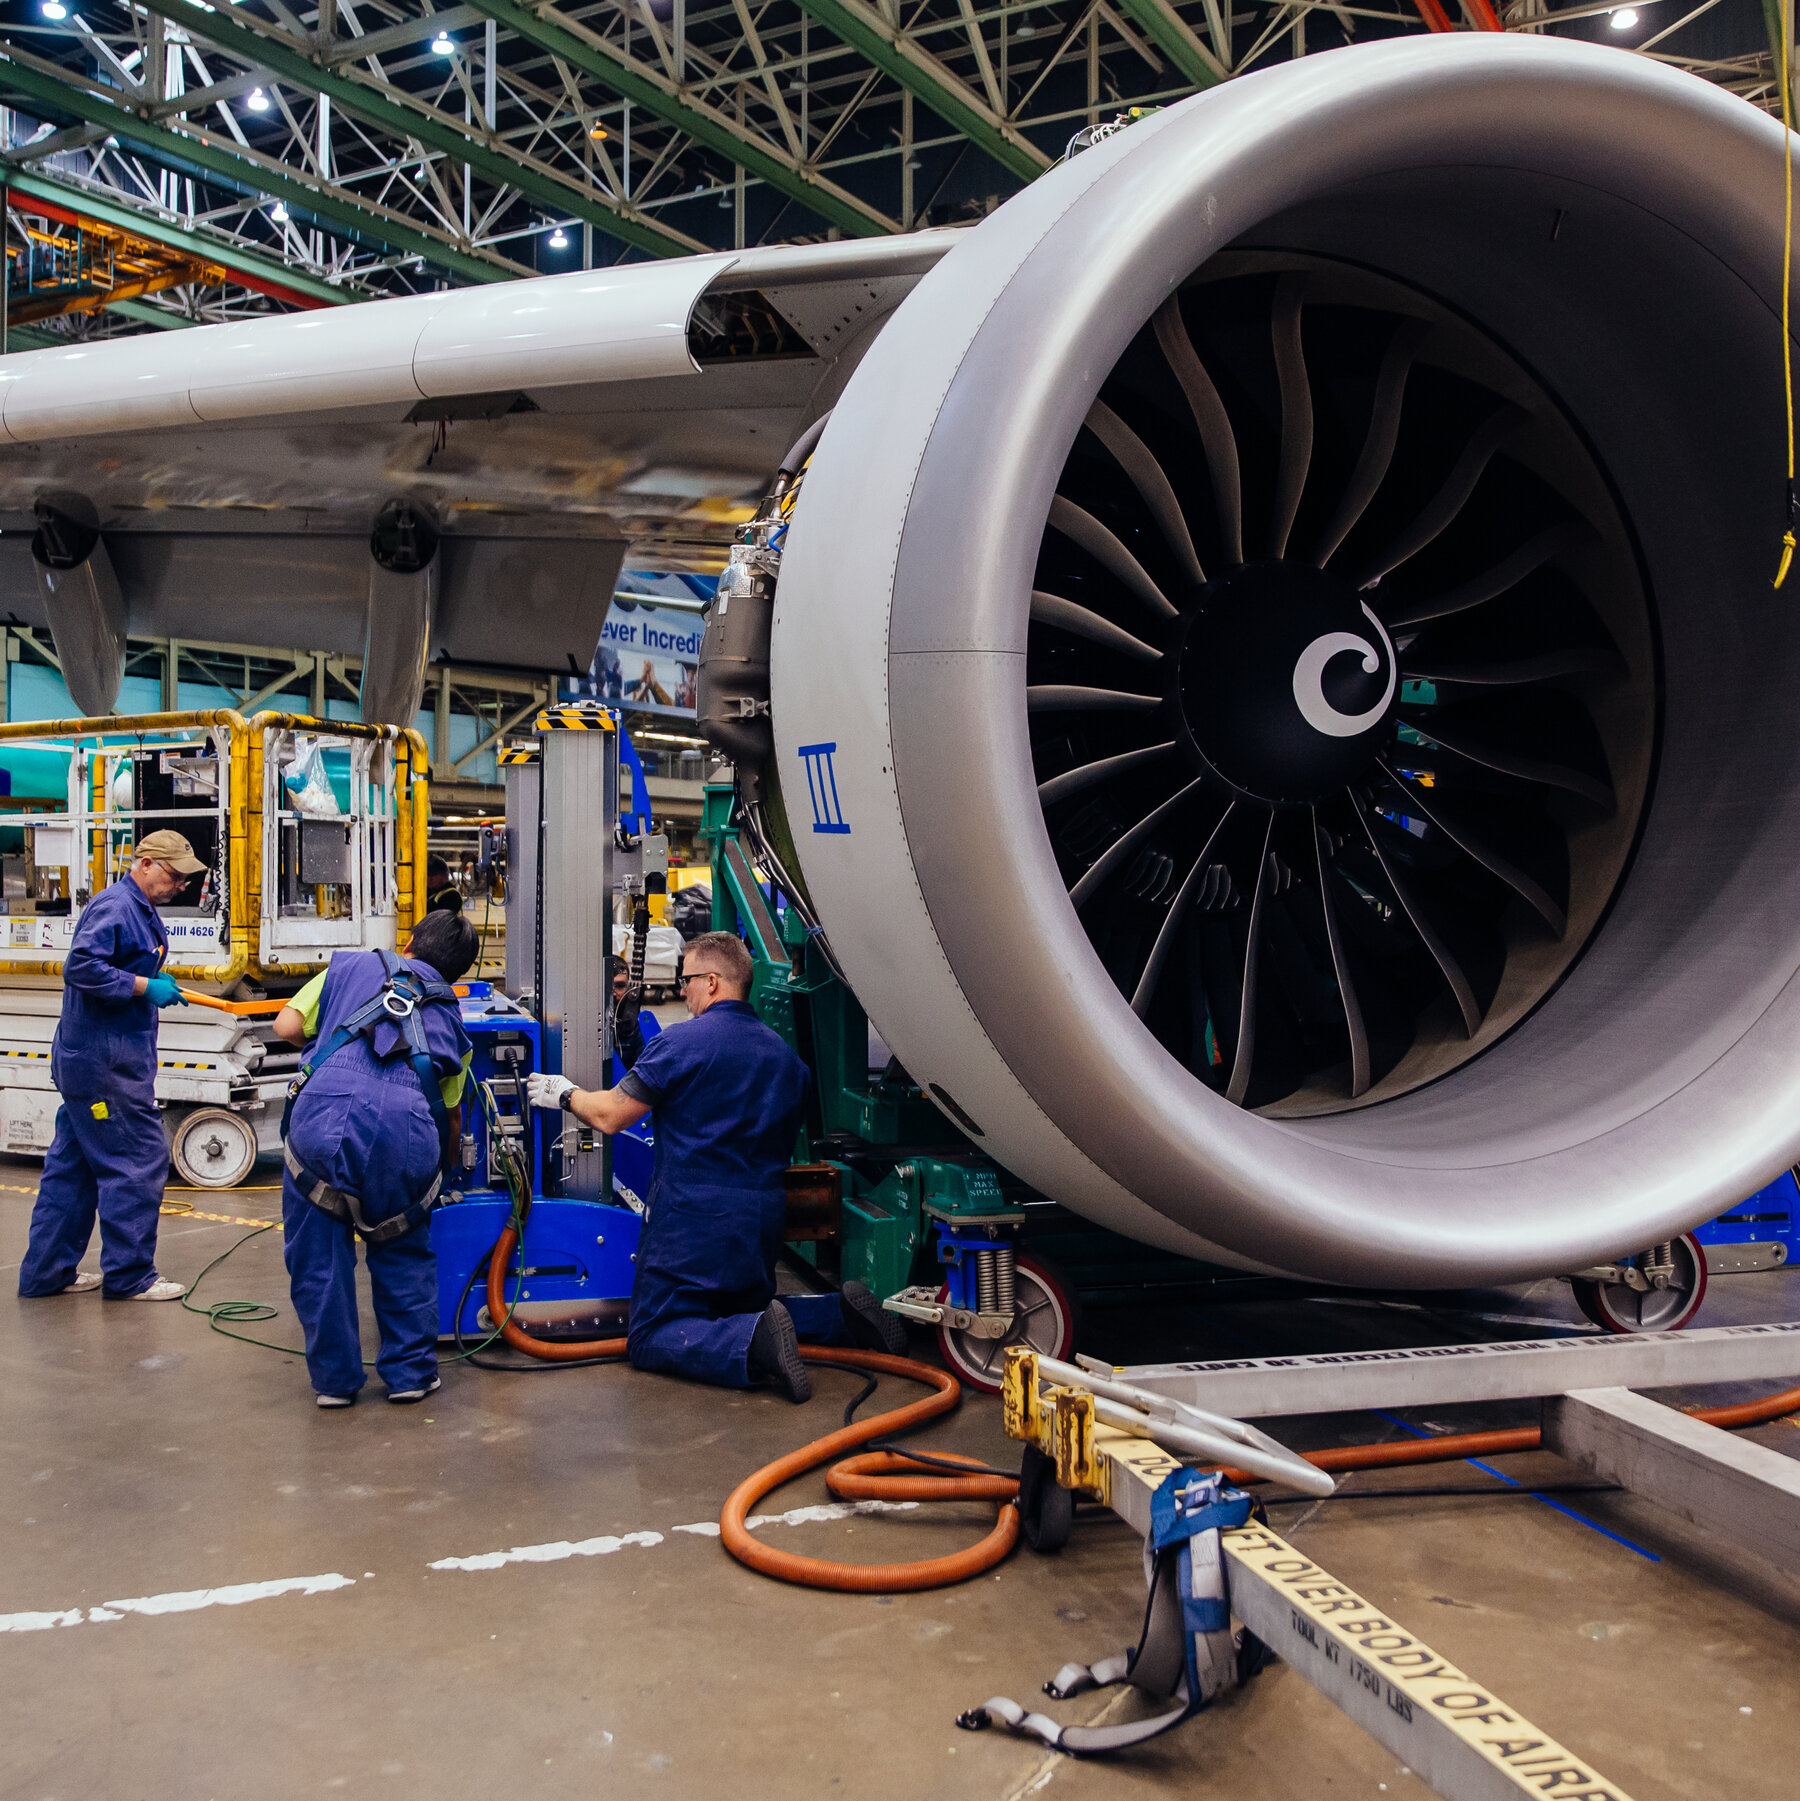 Do You Have Experience Working With Boeing? We Want to Hear From You.